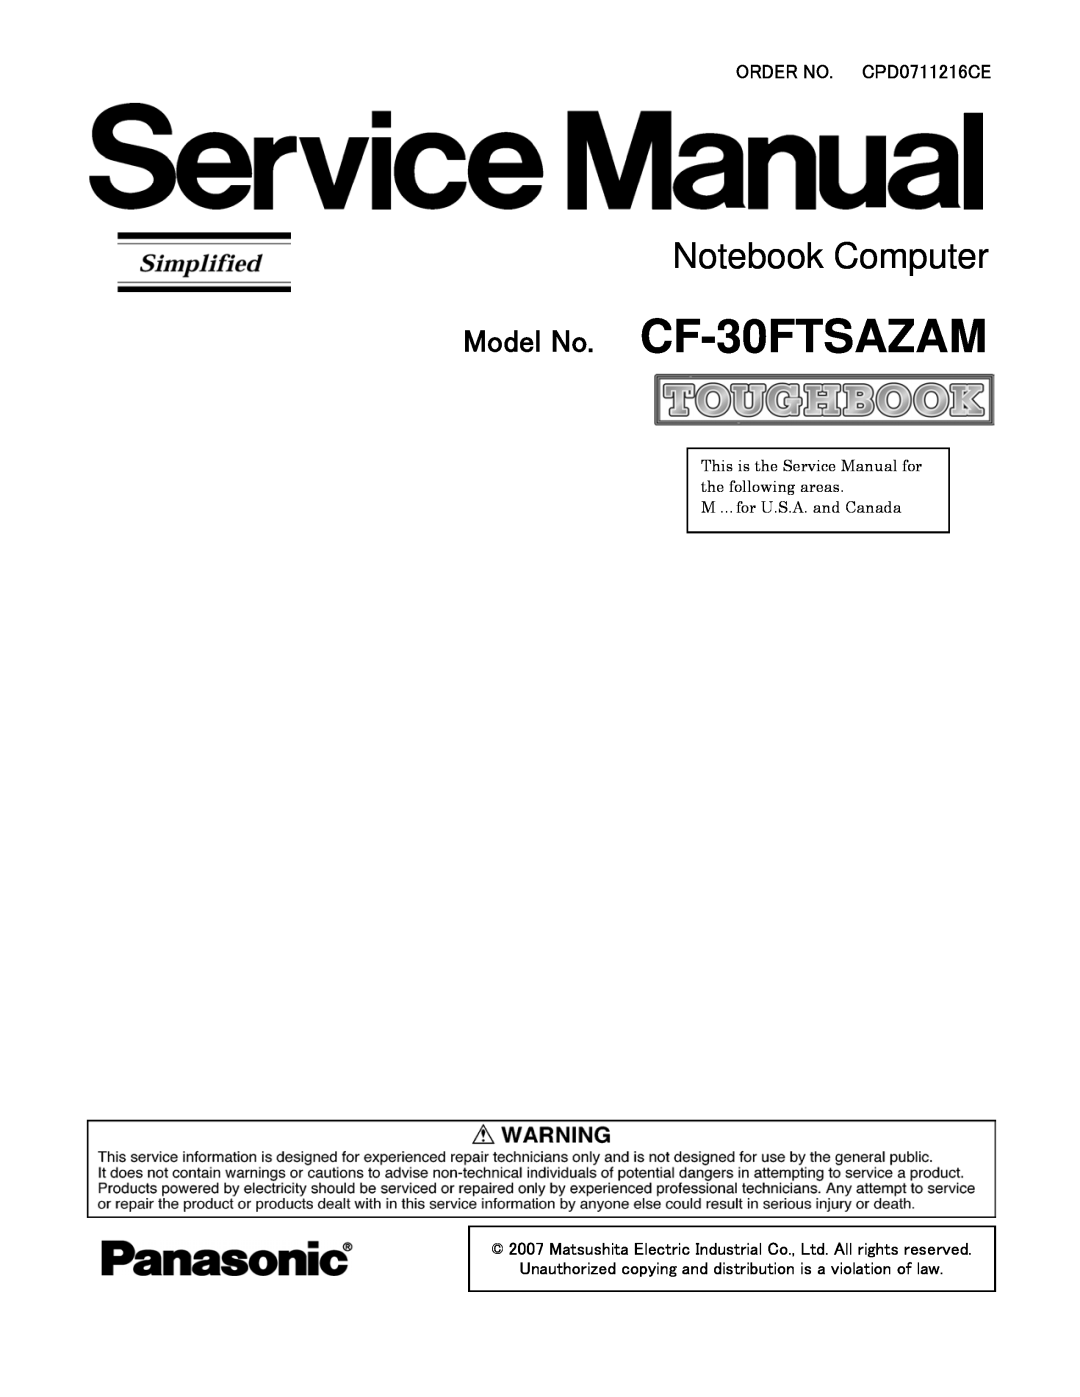 Philips service manual Model No. CF-30FTSAZAM, Notebook Computer, ORDER NO. CPD0711216CE, M …for U.S.A. and Canada 